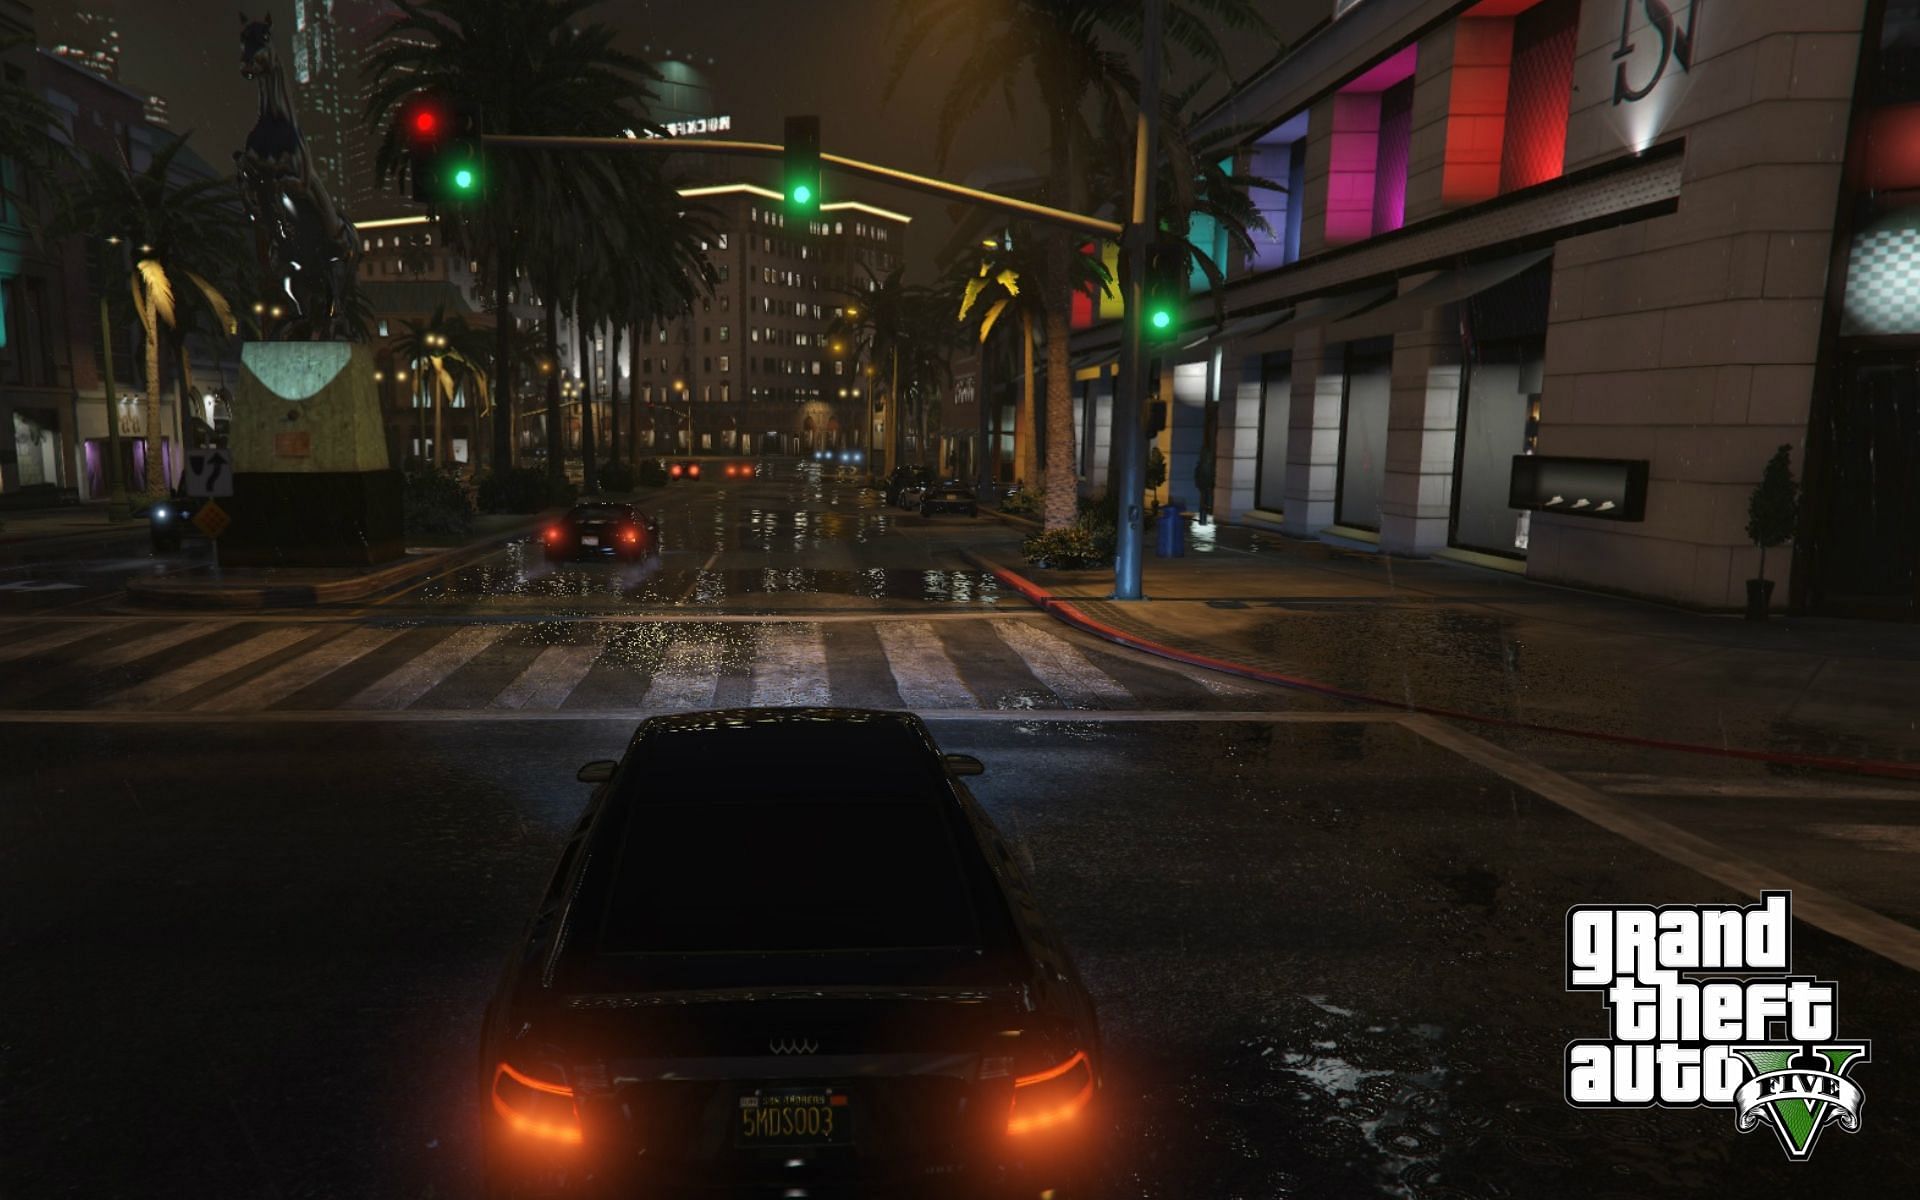 GTA 5 manages to look beautiful even after all these years (Image via Rockstar Games)